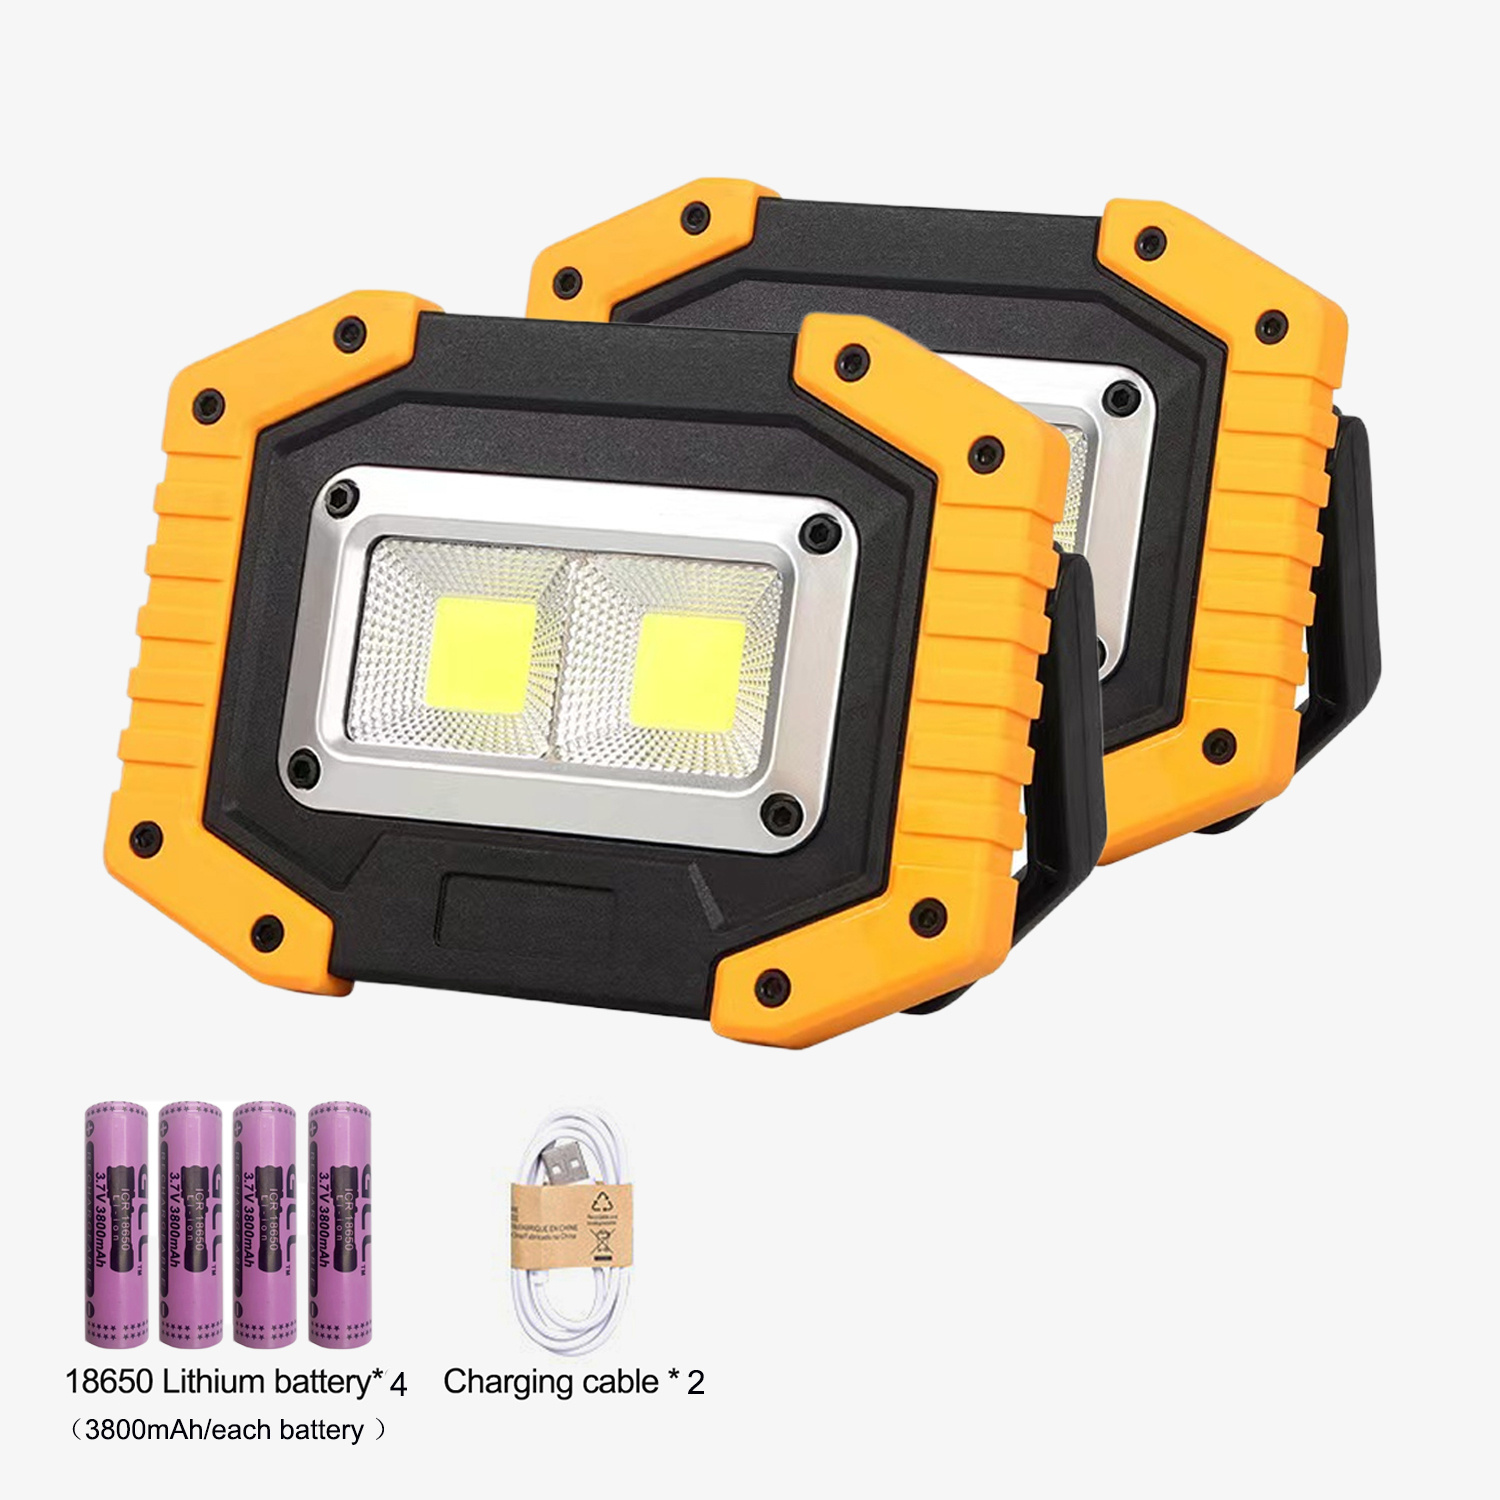 

Rechargeable Camping Lights, Portable Led Tent Lights With 3 Light Modes, Waterproof Outdoor Lights For Camping, Fishing, Car Repair, Hiking, Working